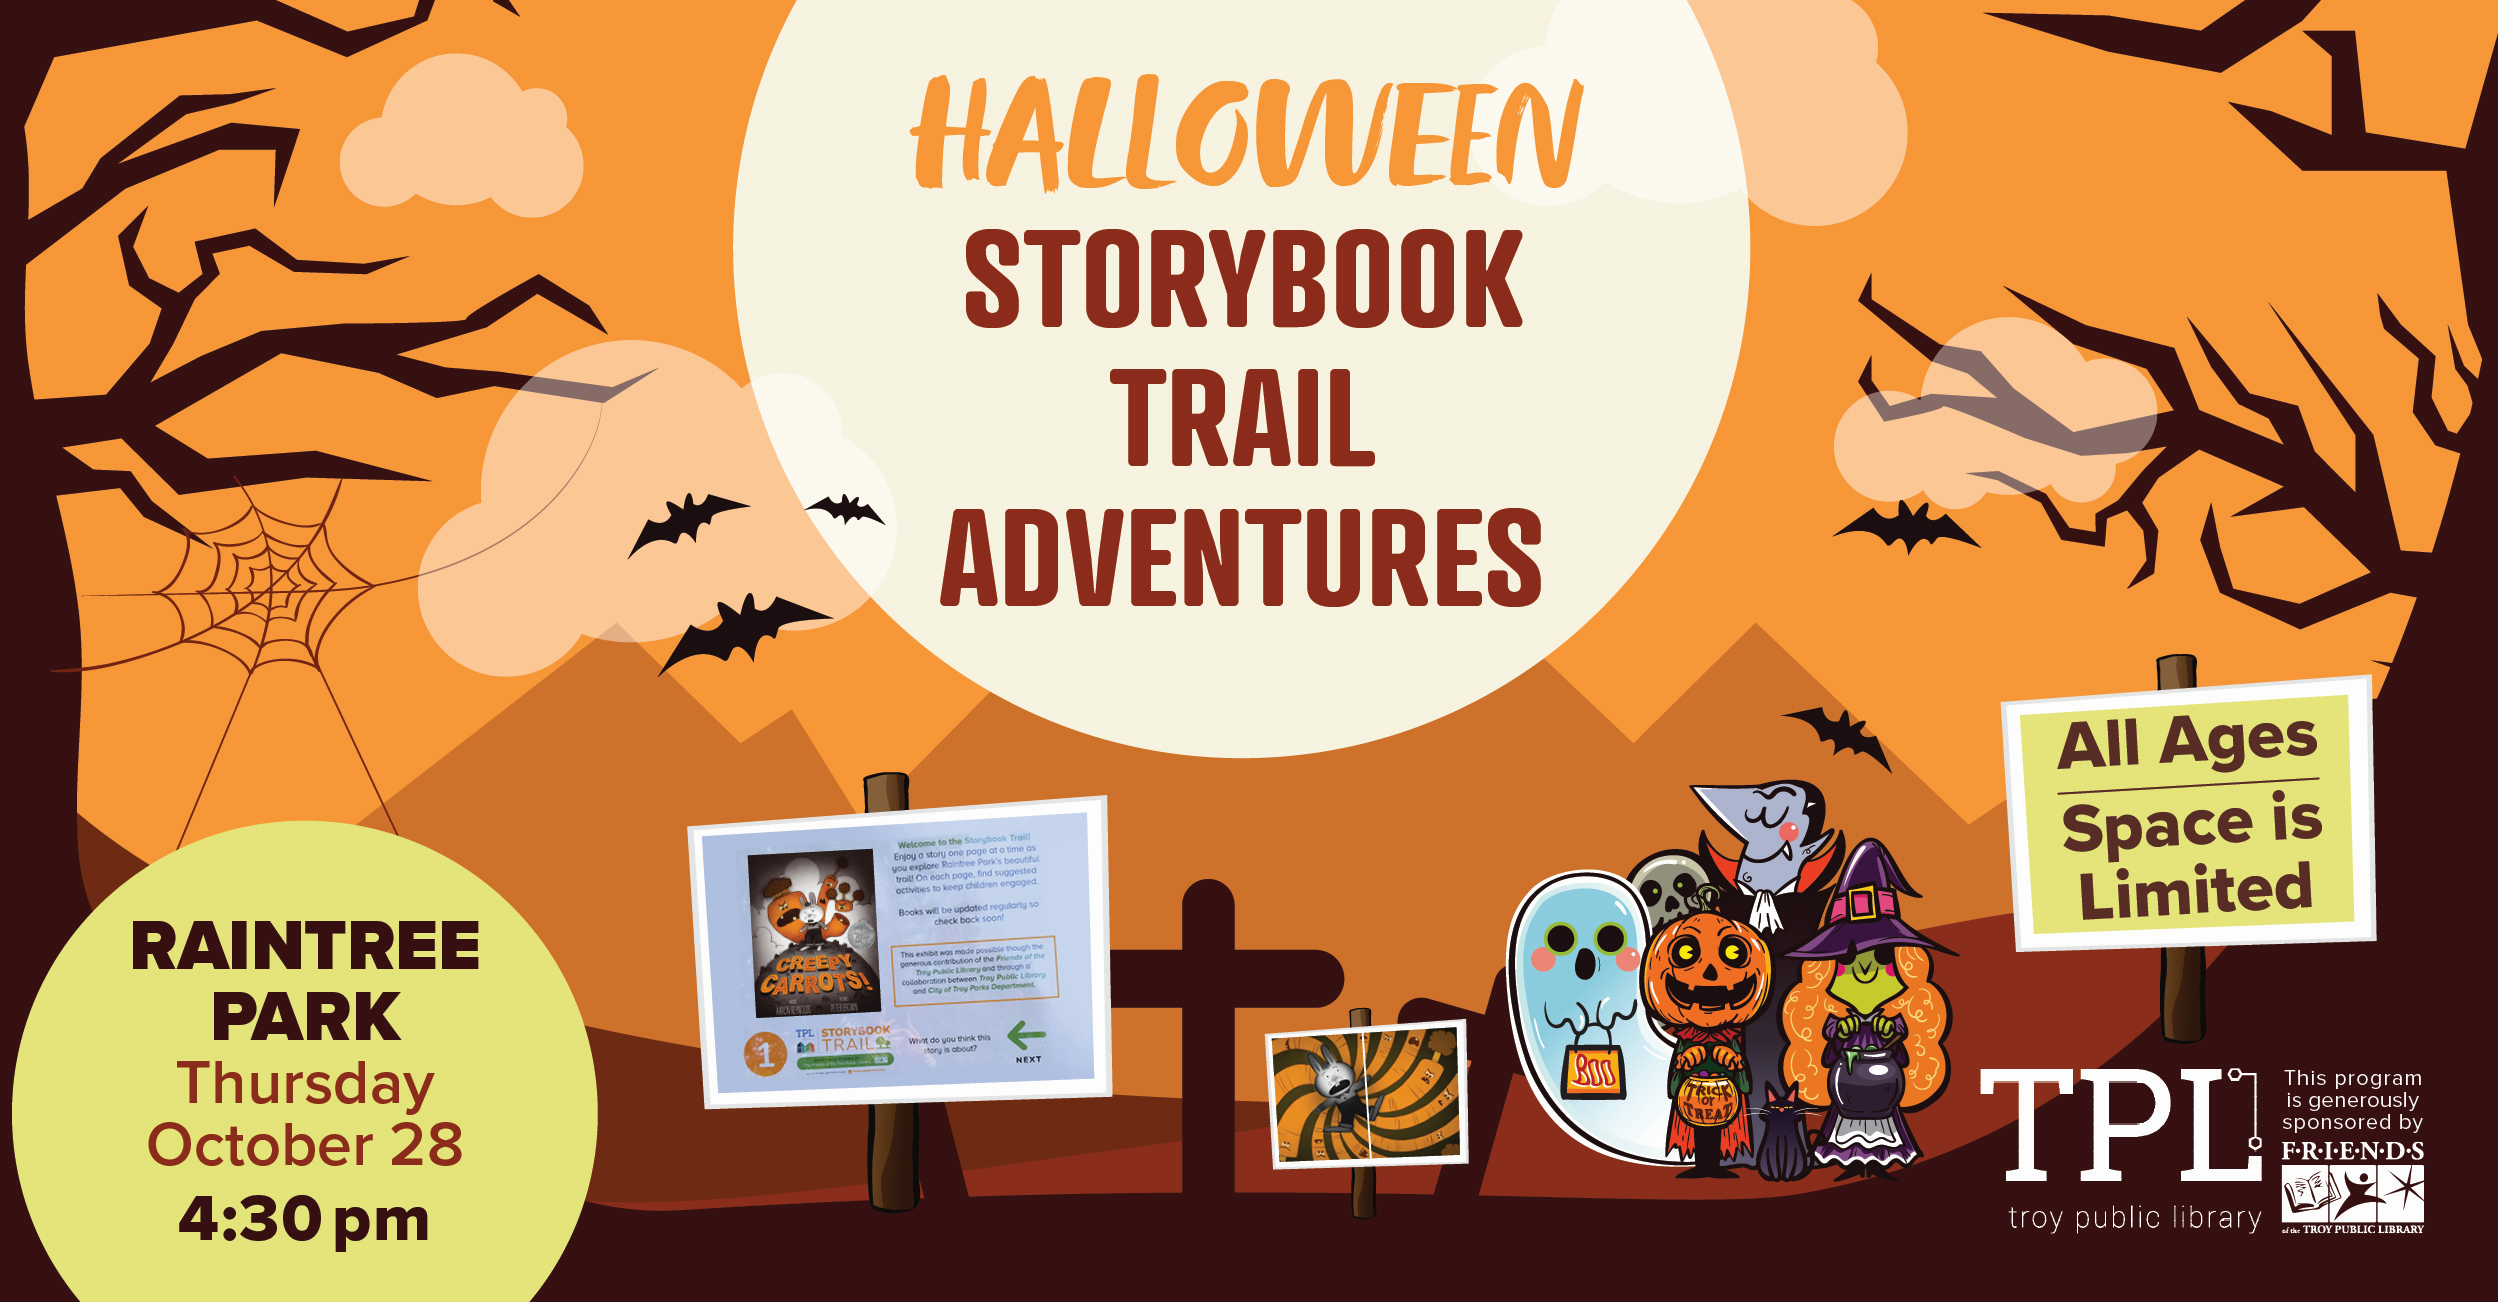 Halloween Storybook Trail Adventures. Raintree Park, Thursday, October 28 at 4:30pm. All ages. Space is Limited. Sponsored by the Friends of the Troy Public Library. 